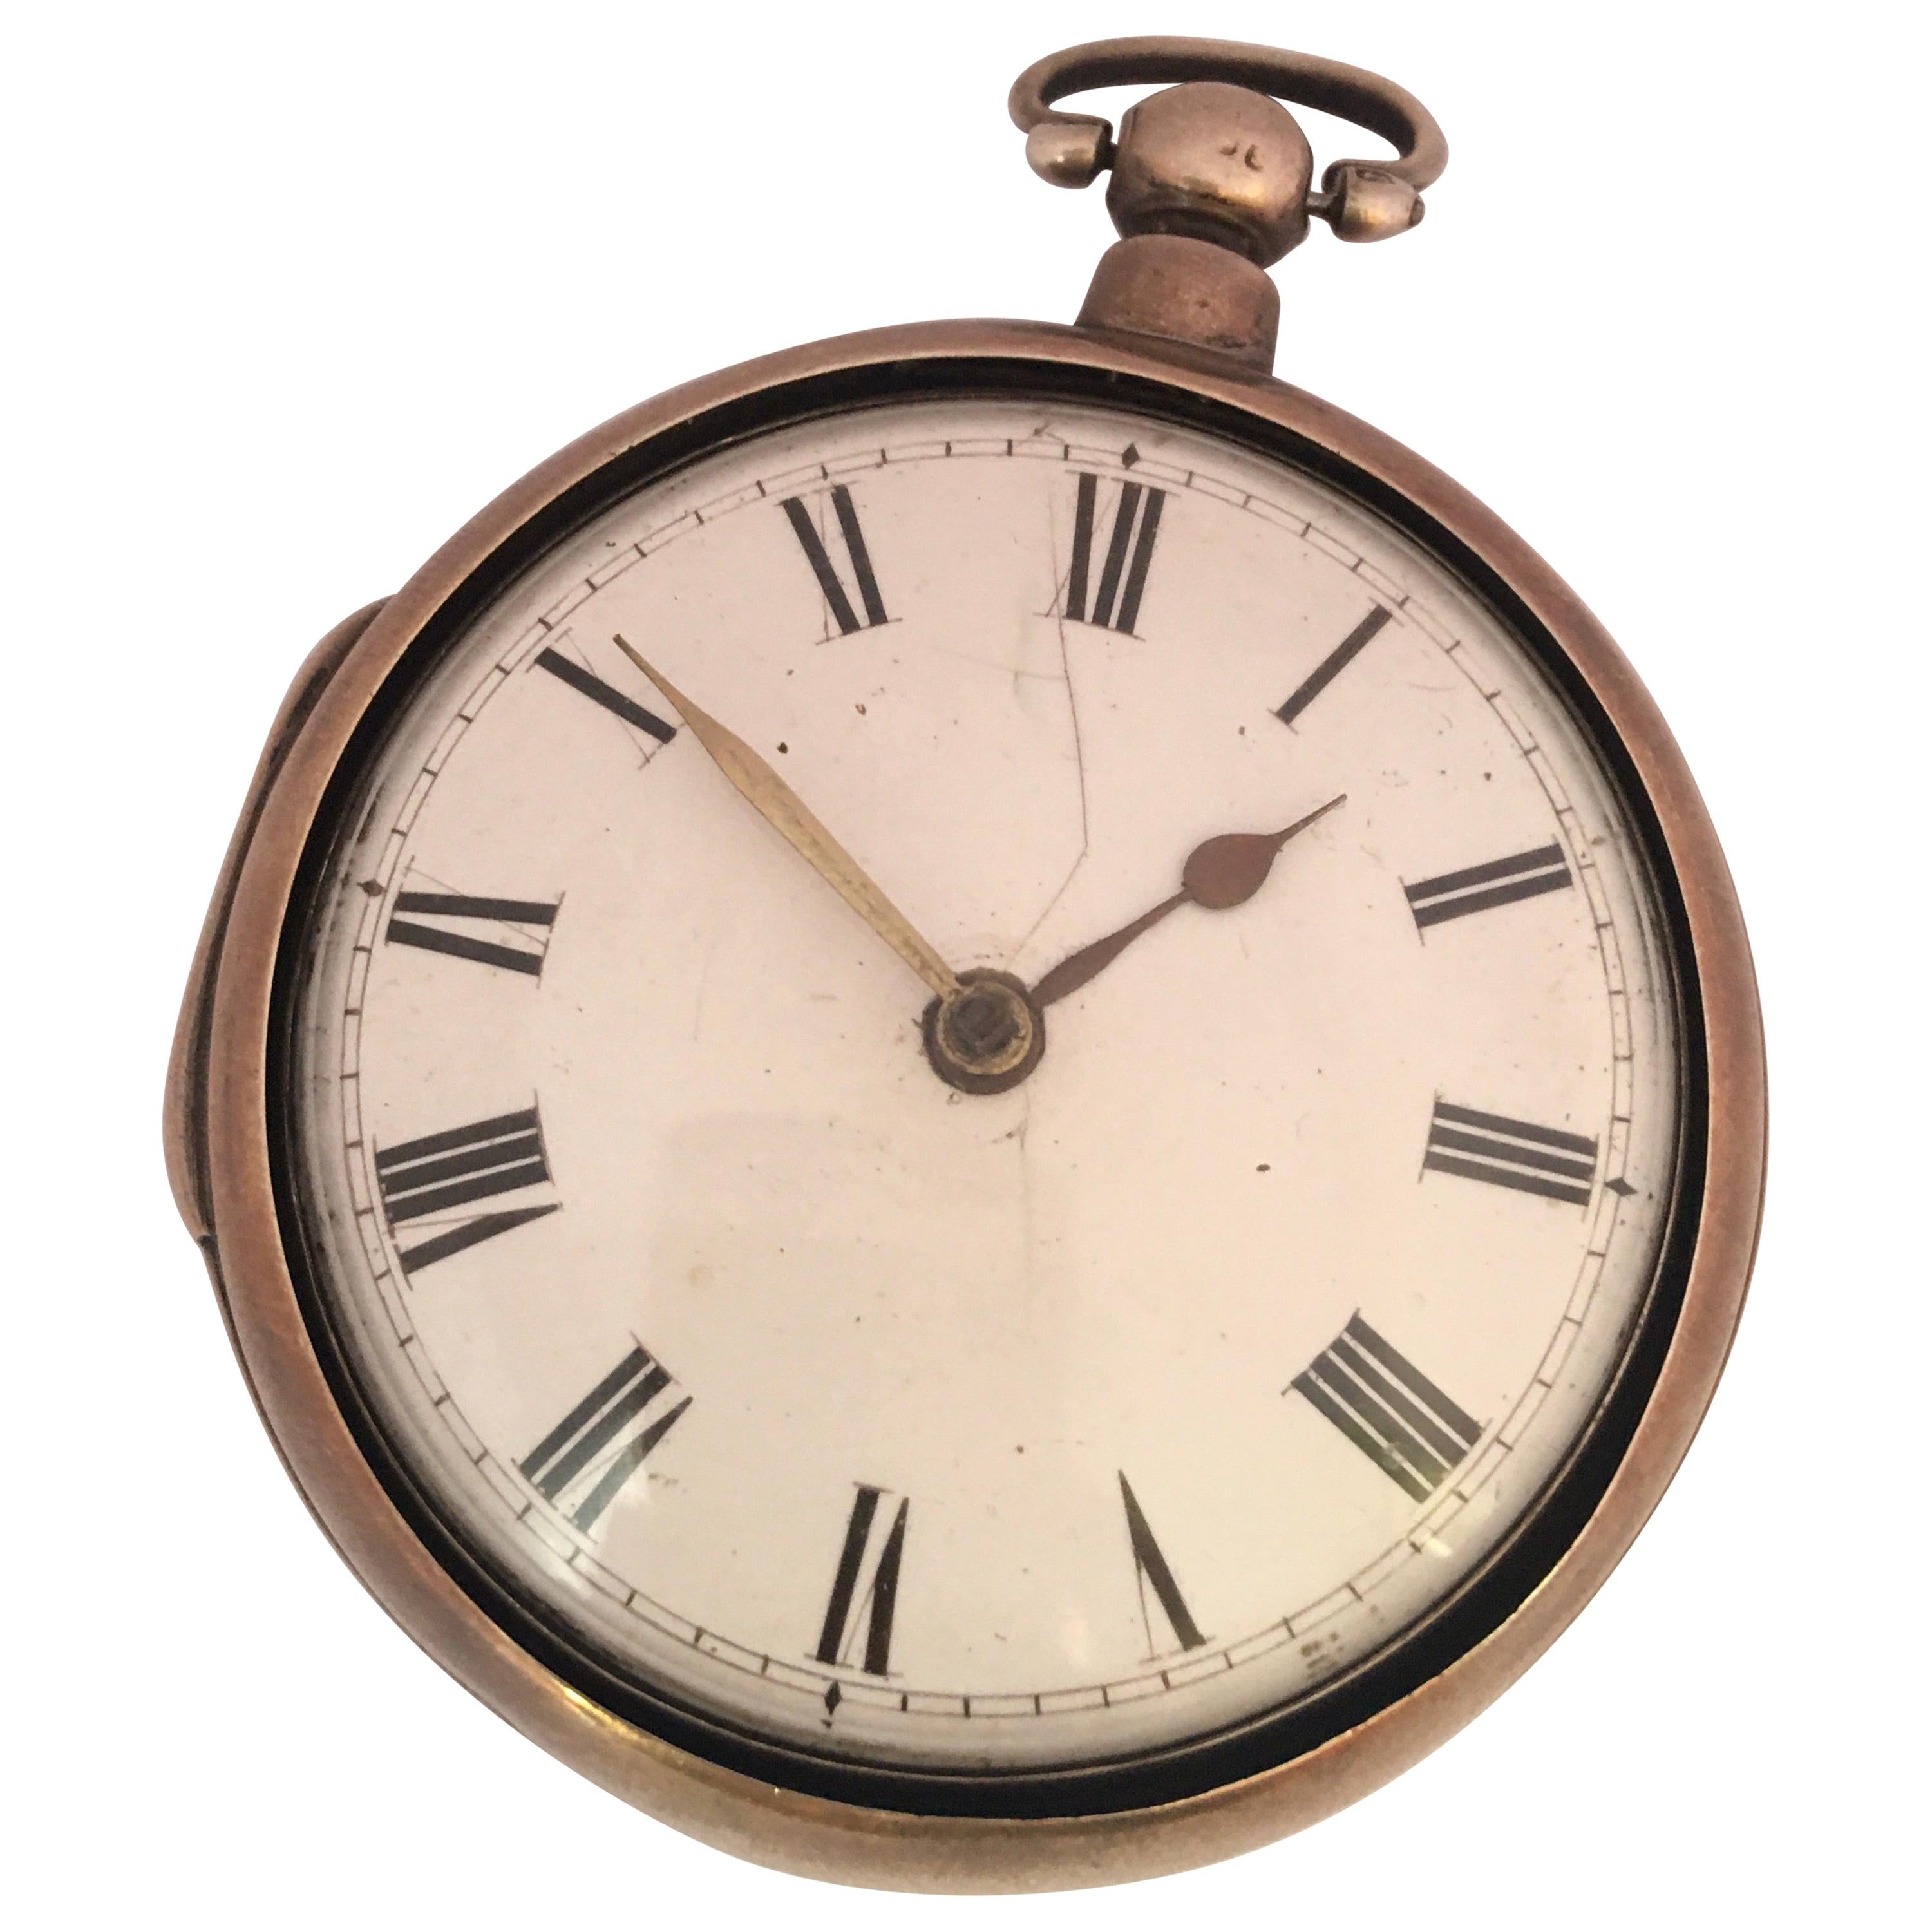 Early English Silver Pair Cased Verge Pocket Watch For Sale